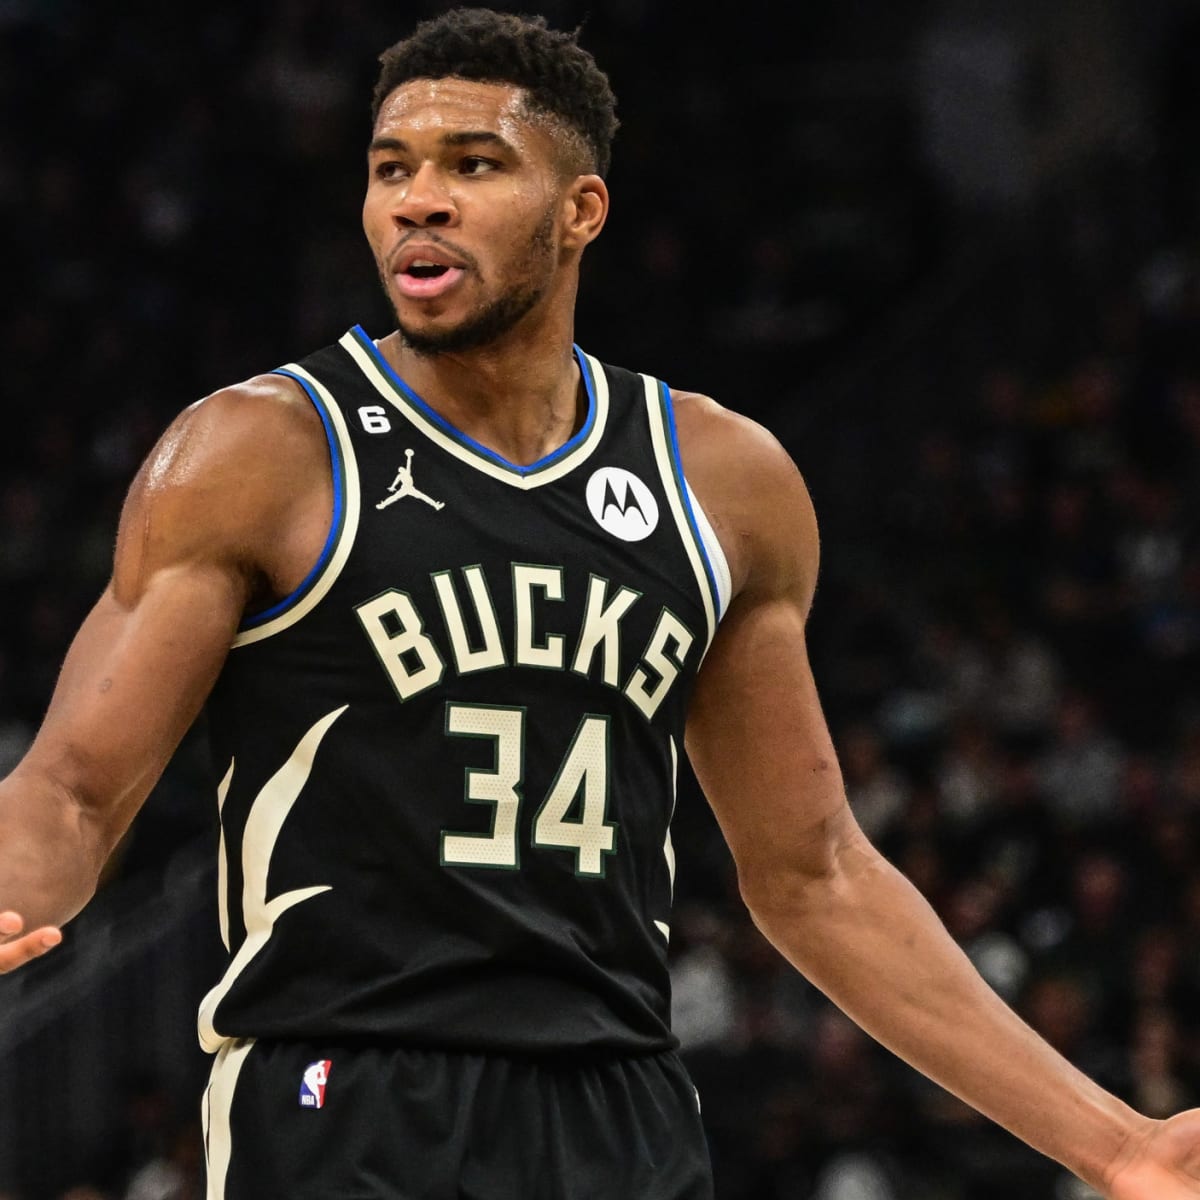 What's special about Giannis Antetokounmpo's jersey number 34